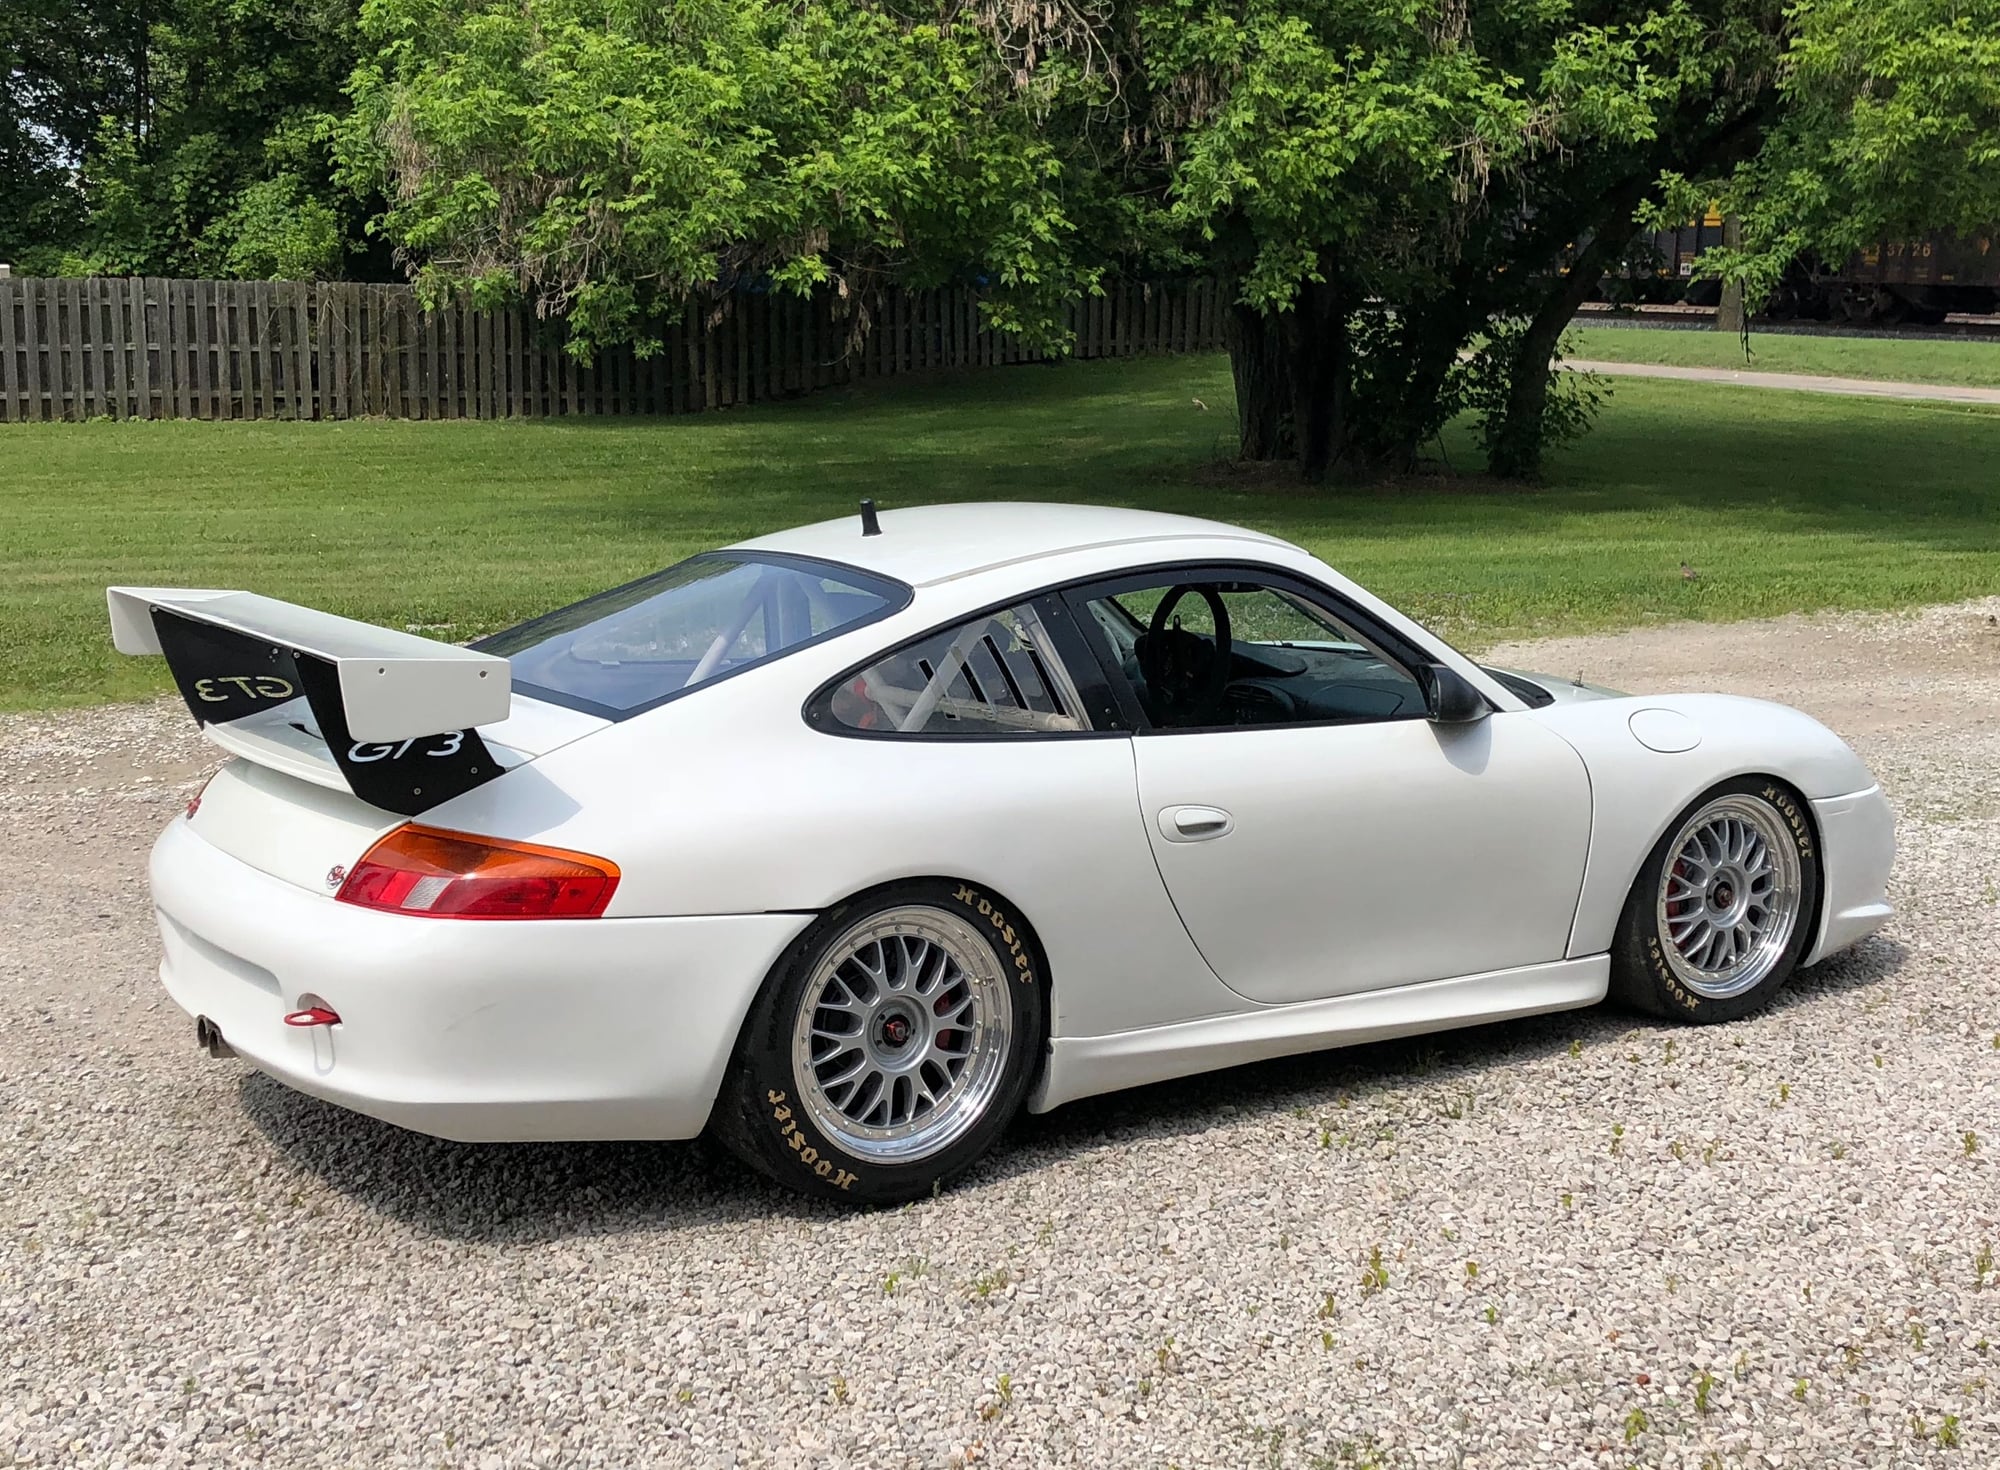 2004 Porsche 911 - 2003 Porsche GT3 Cup - Used - VIN 12345678901234567 - 6 cyl - 2WD - Manual - Coupe - White - Cleveland, OH 44140, United States